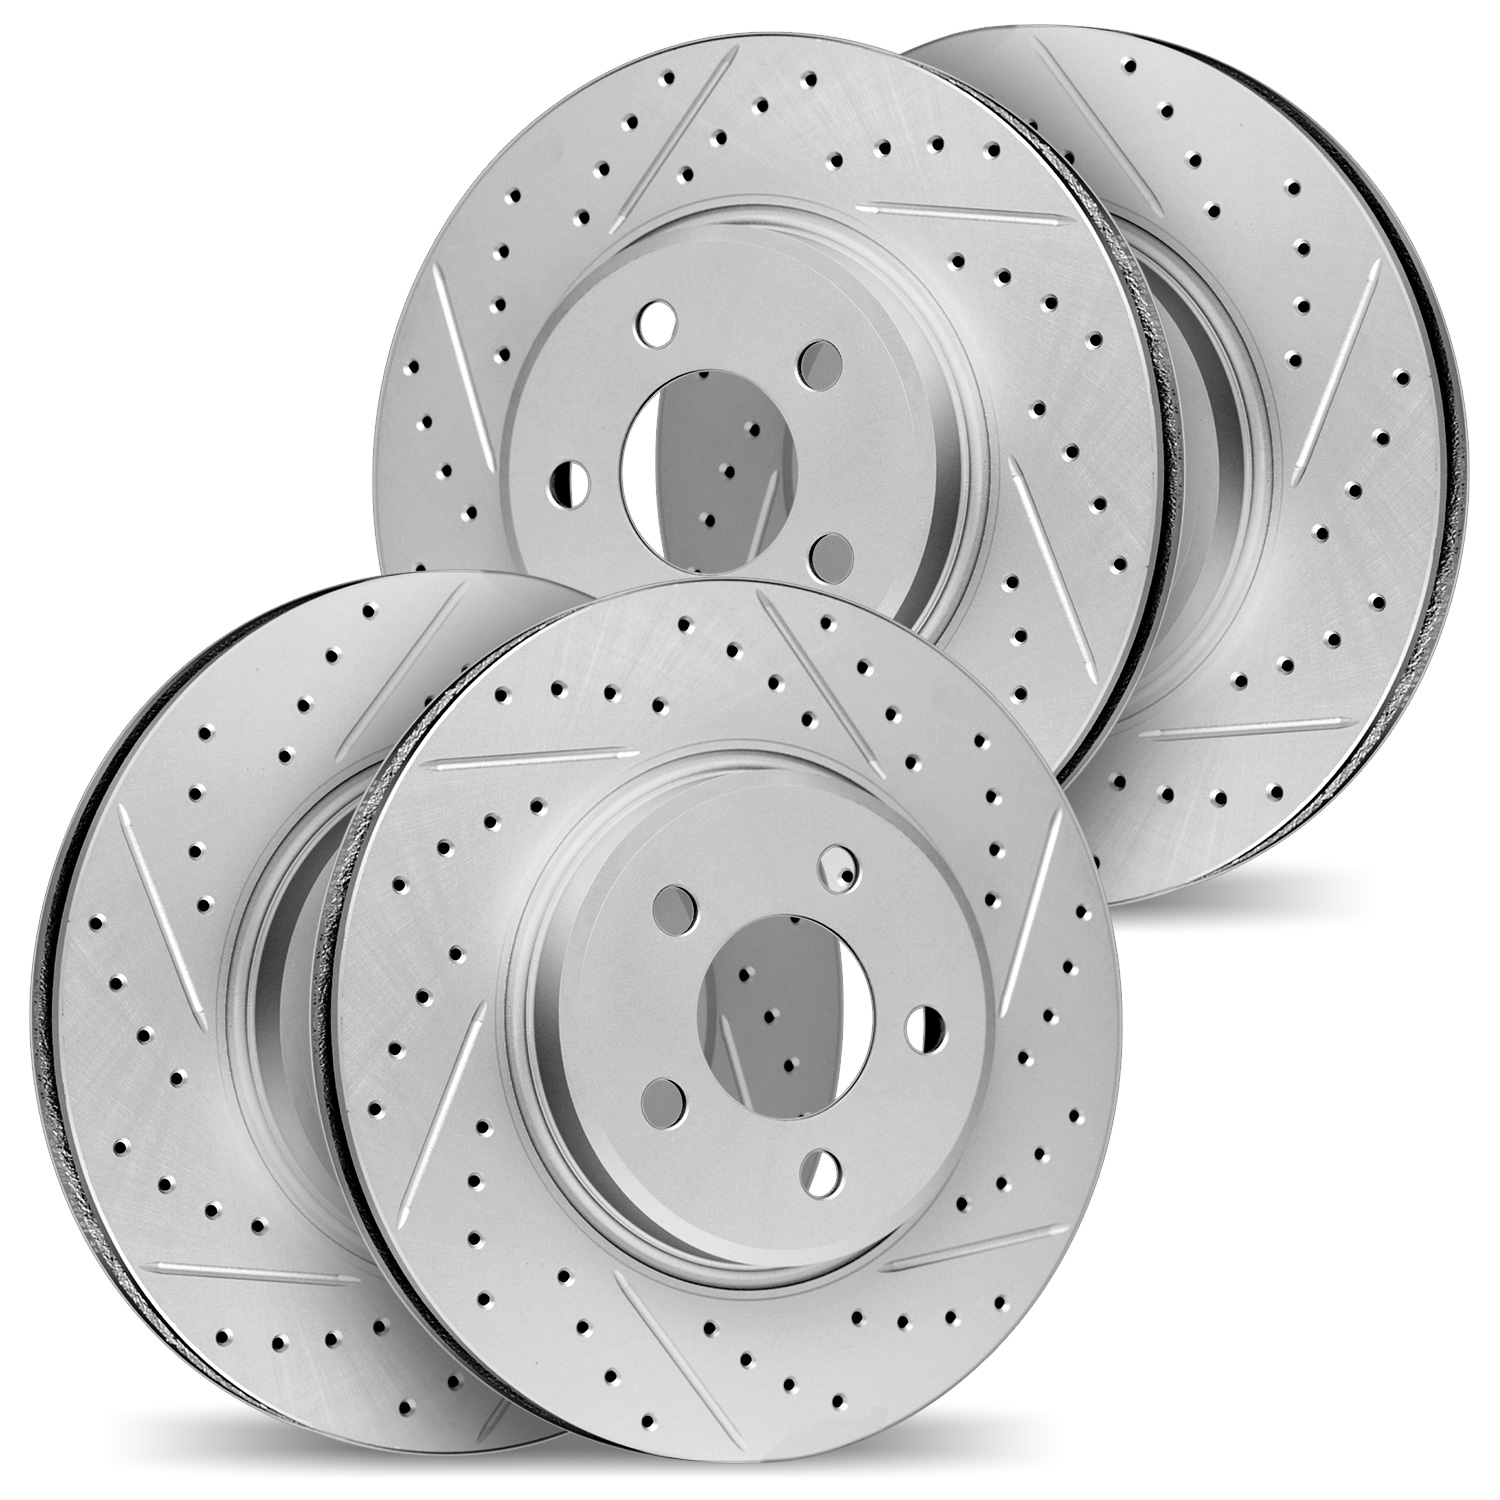 2004-31034 Geoperformance Drilled/Slotted Brake Rotors, Fits Select BMW, Position: Front and Rear